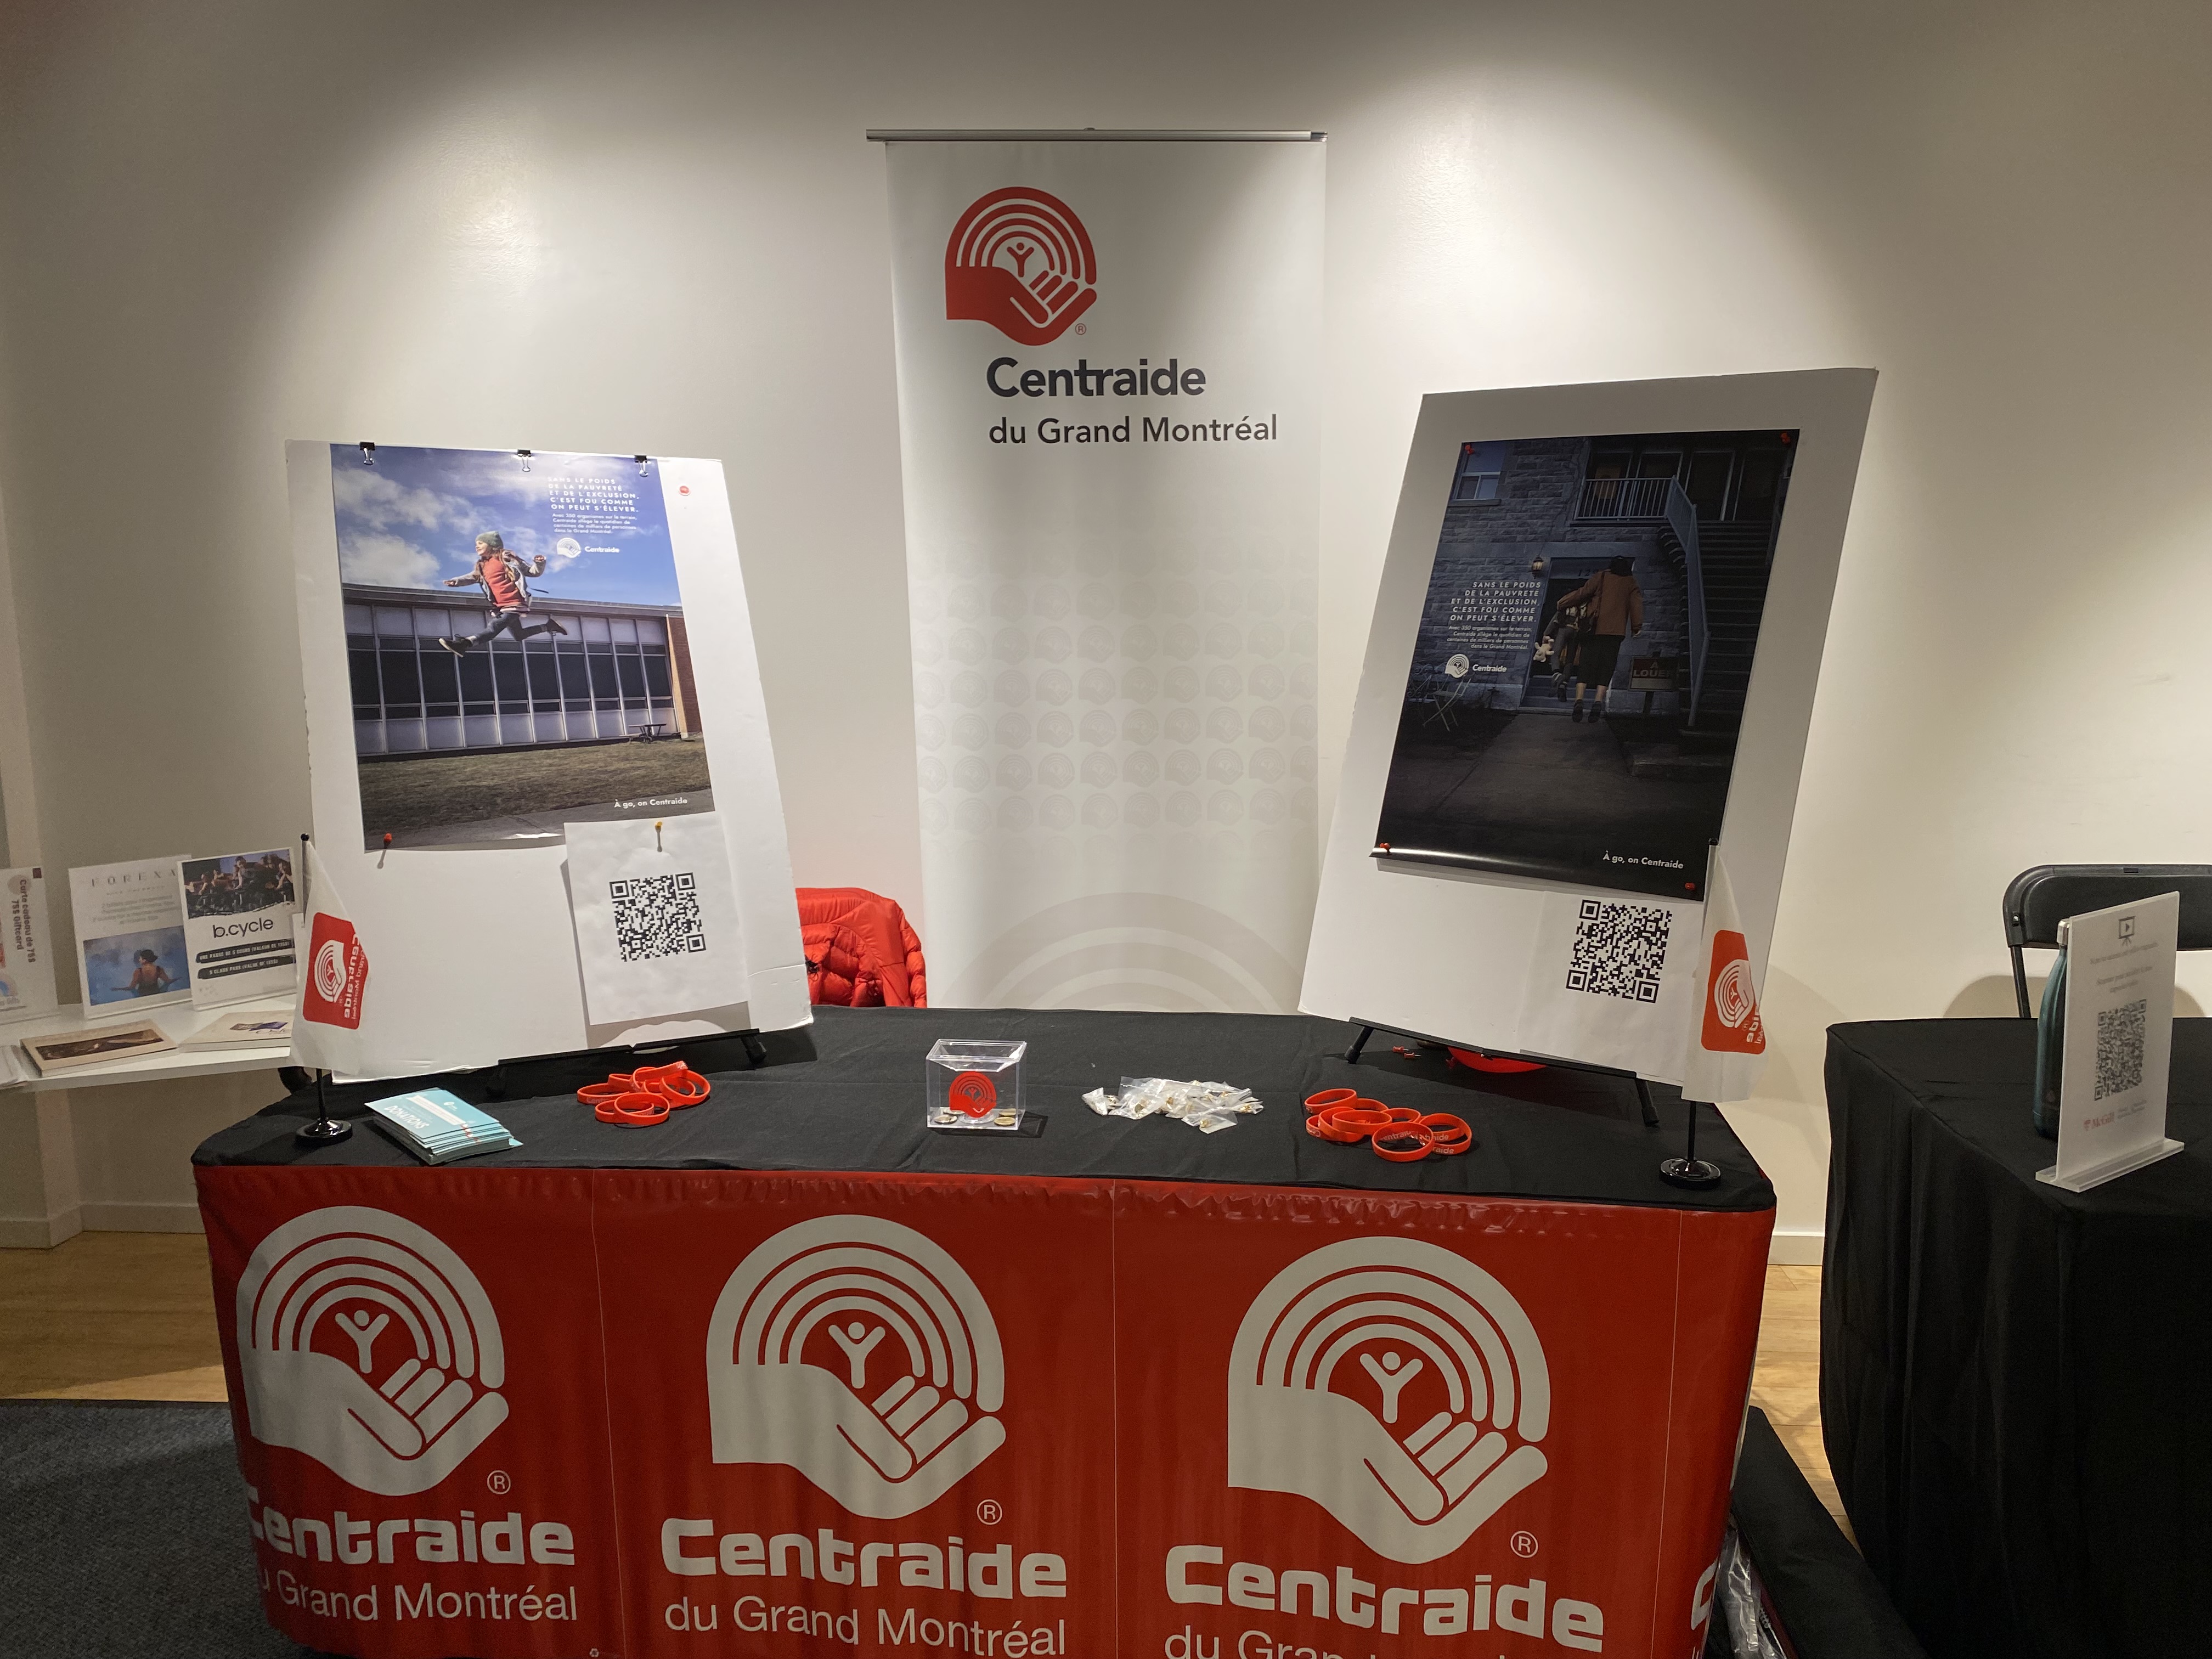 Centraide booth at the McGill Health Fair with information posters, brochures and giveaway items